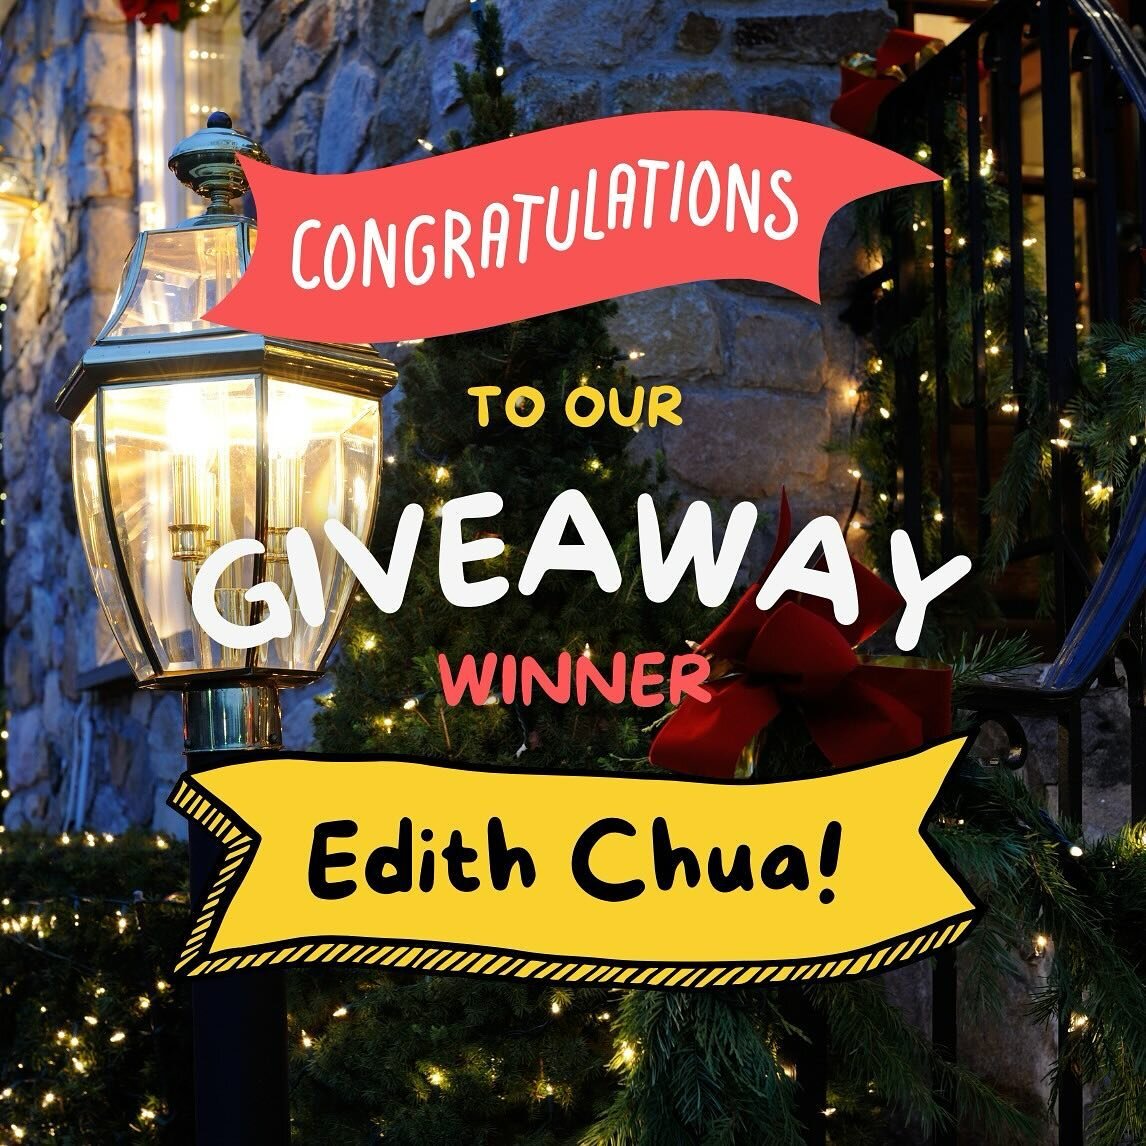 Huge congratulations to Edith Chua @anchoressinthecell who has won TWO tickets to Christmas with ROS on 15 Dec at 7.45pm at SOTA Concert Hall!